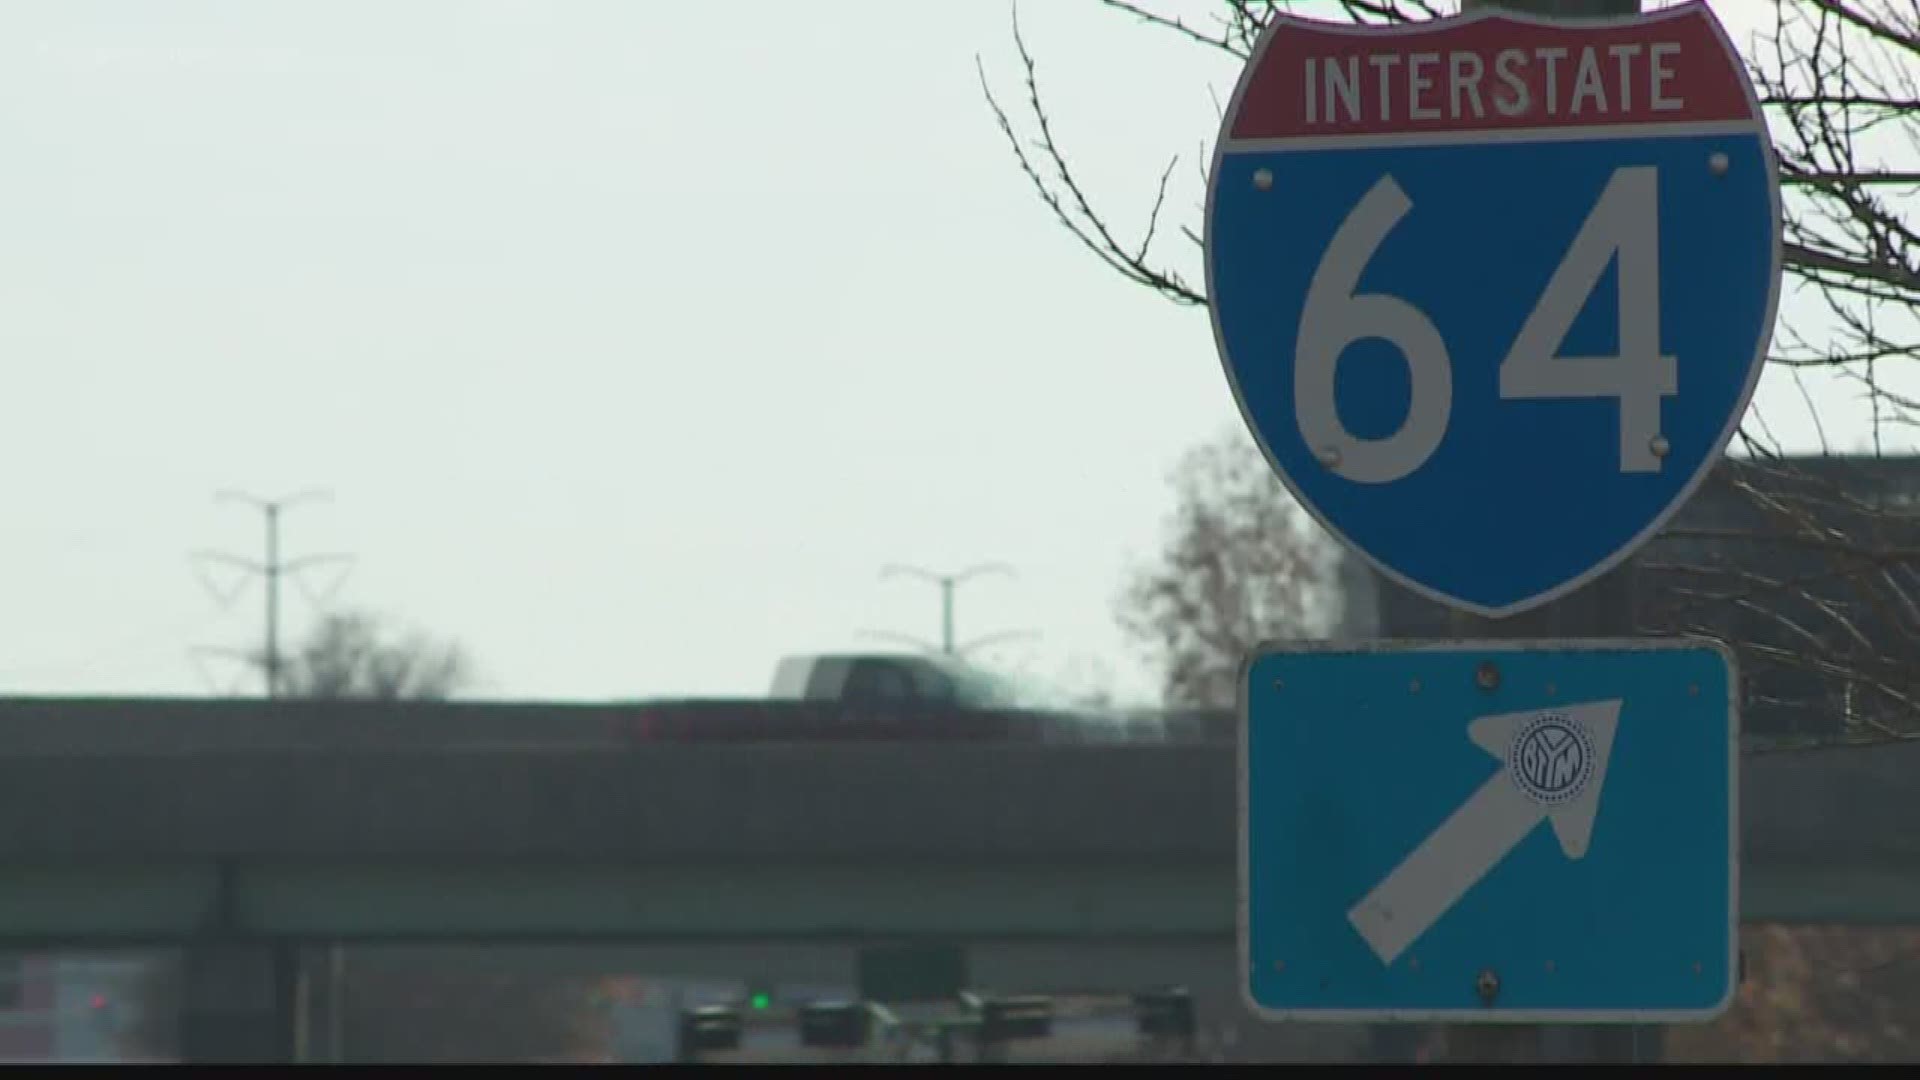 More than $3 billion will be spent to expand the Hampton Roads Bridge Tunnel.